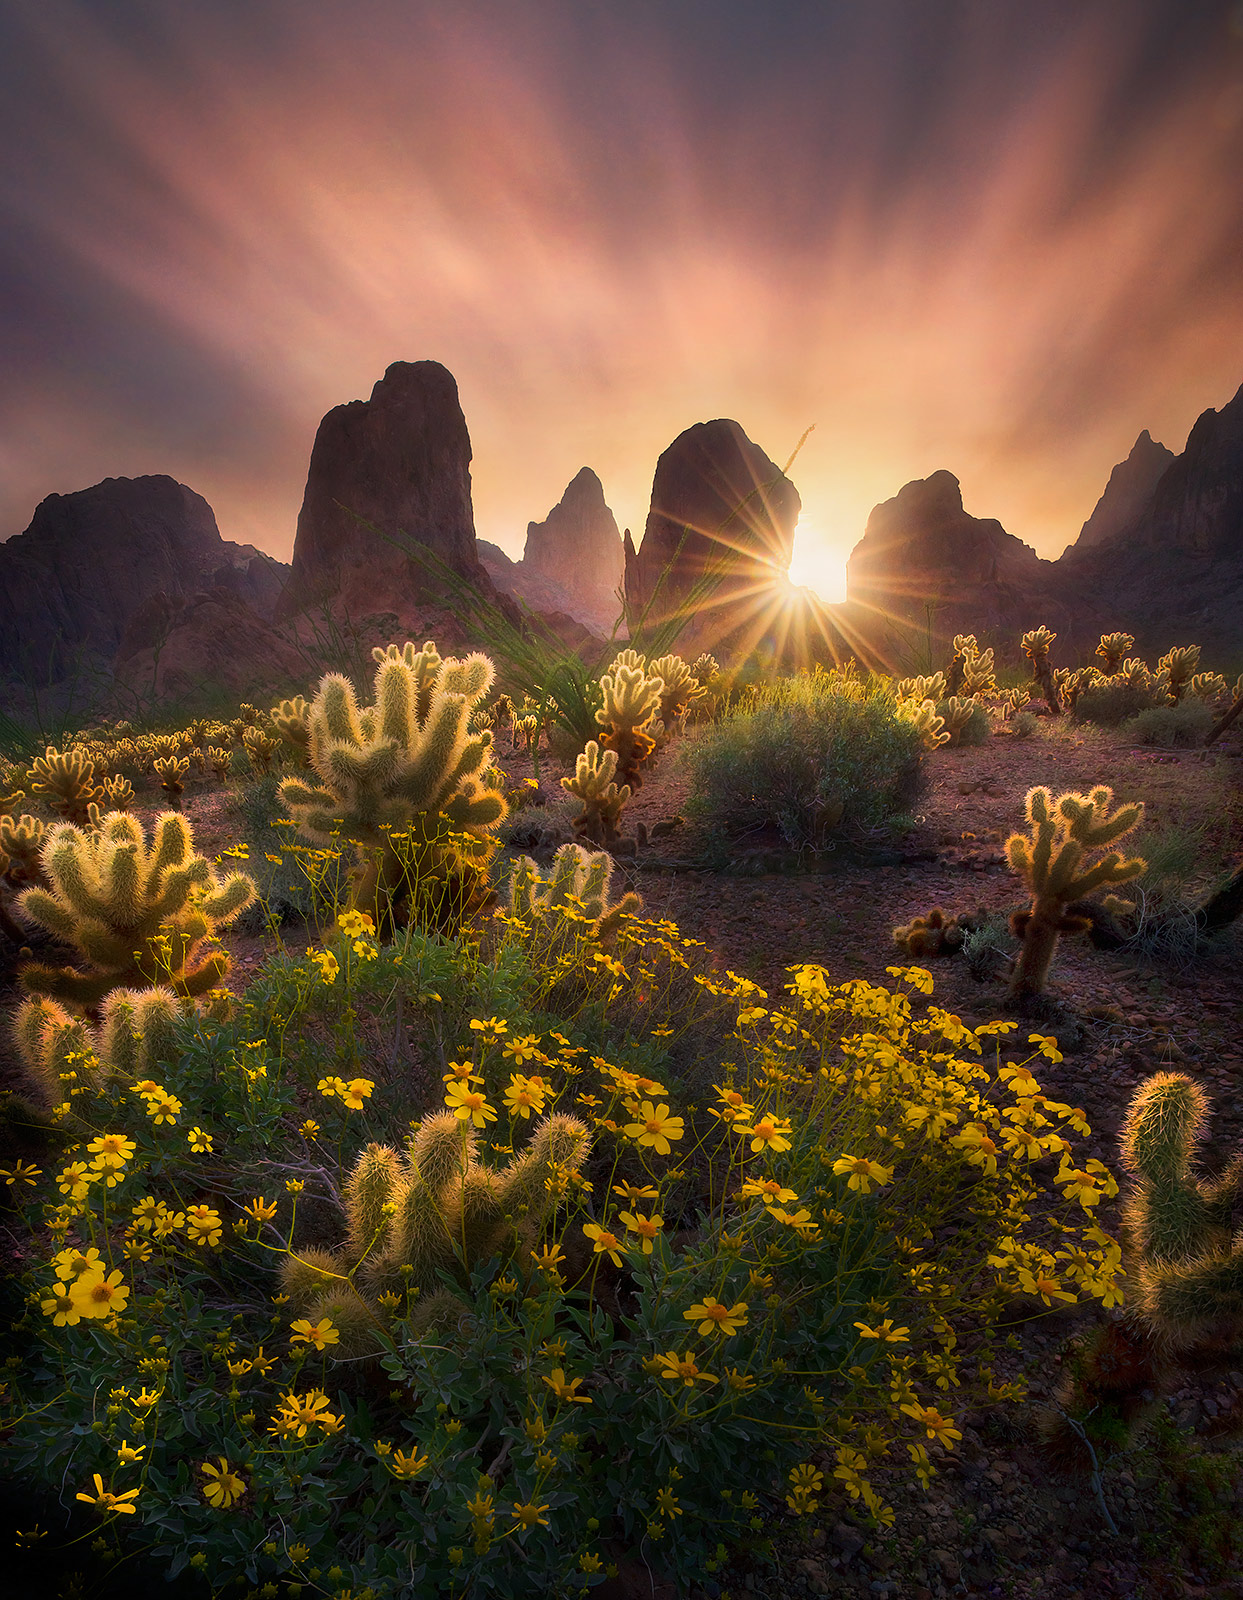 A very long exposure time streaks the cloud motion at sunrise over mountains in Southern Arizona and a spring wildflower bloom...